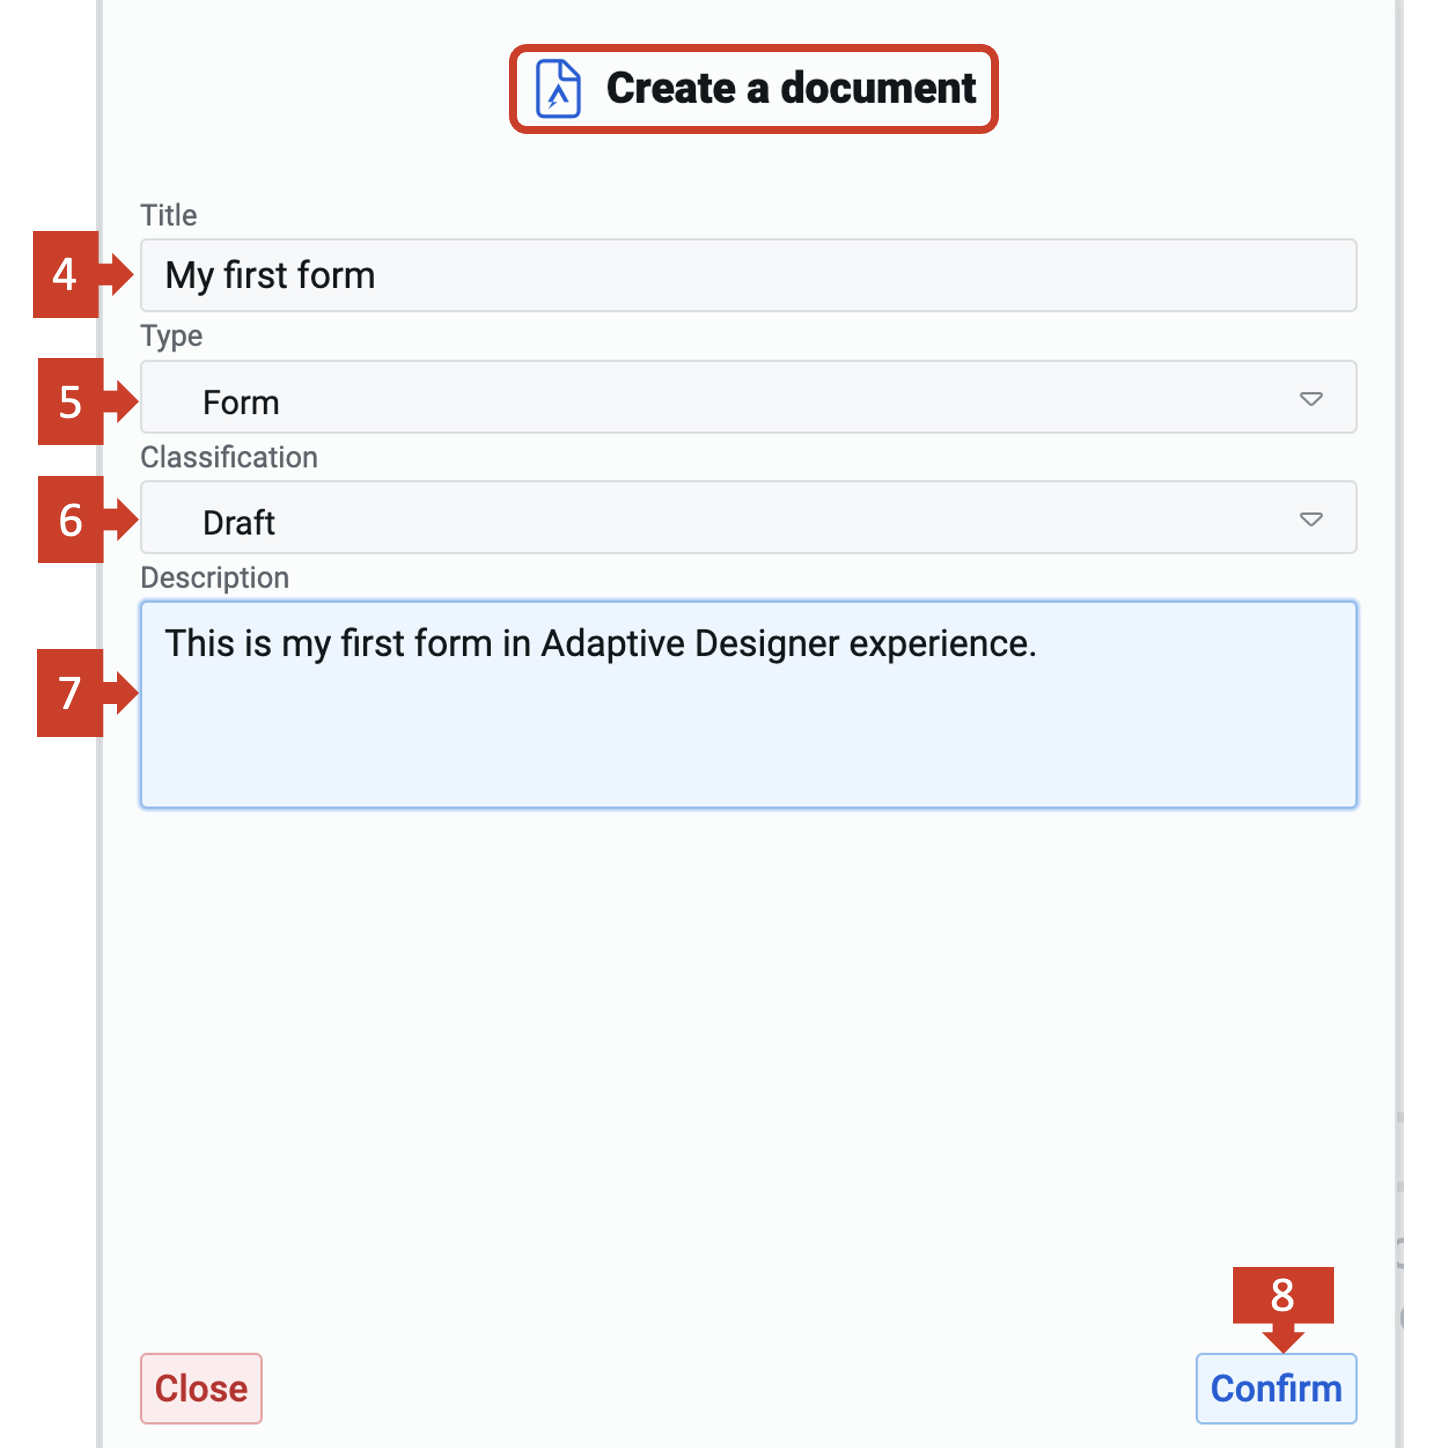 Image showing create a document popup with fields